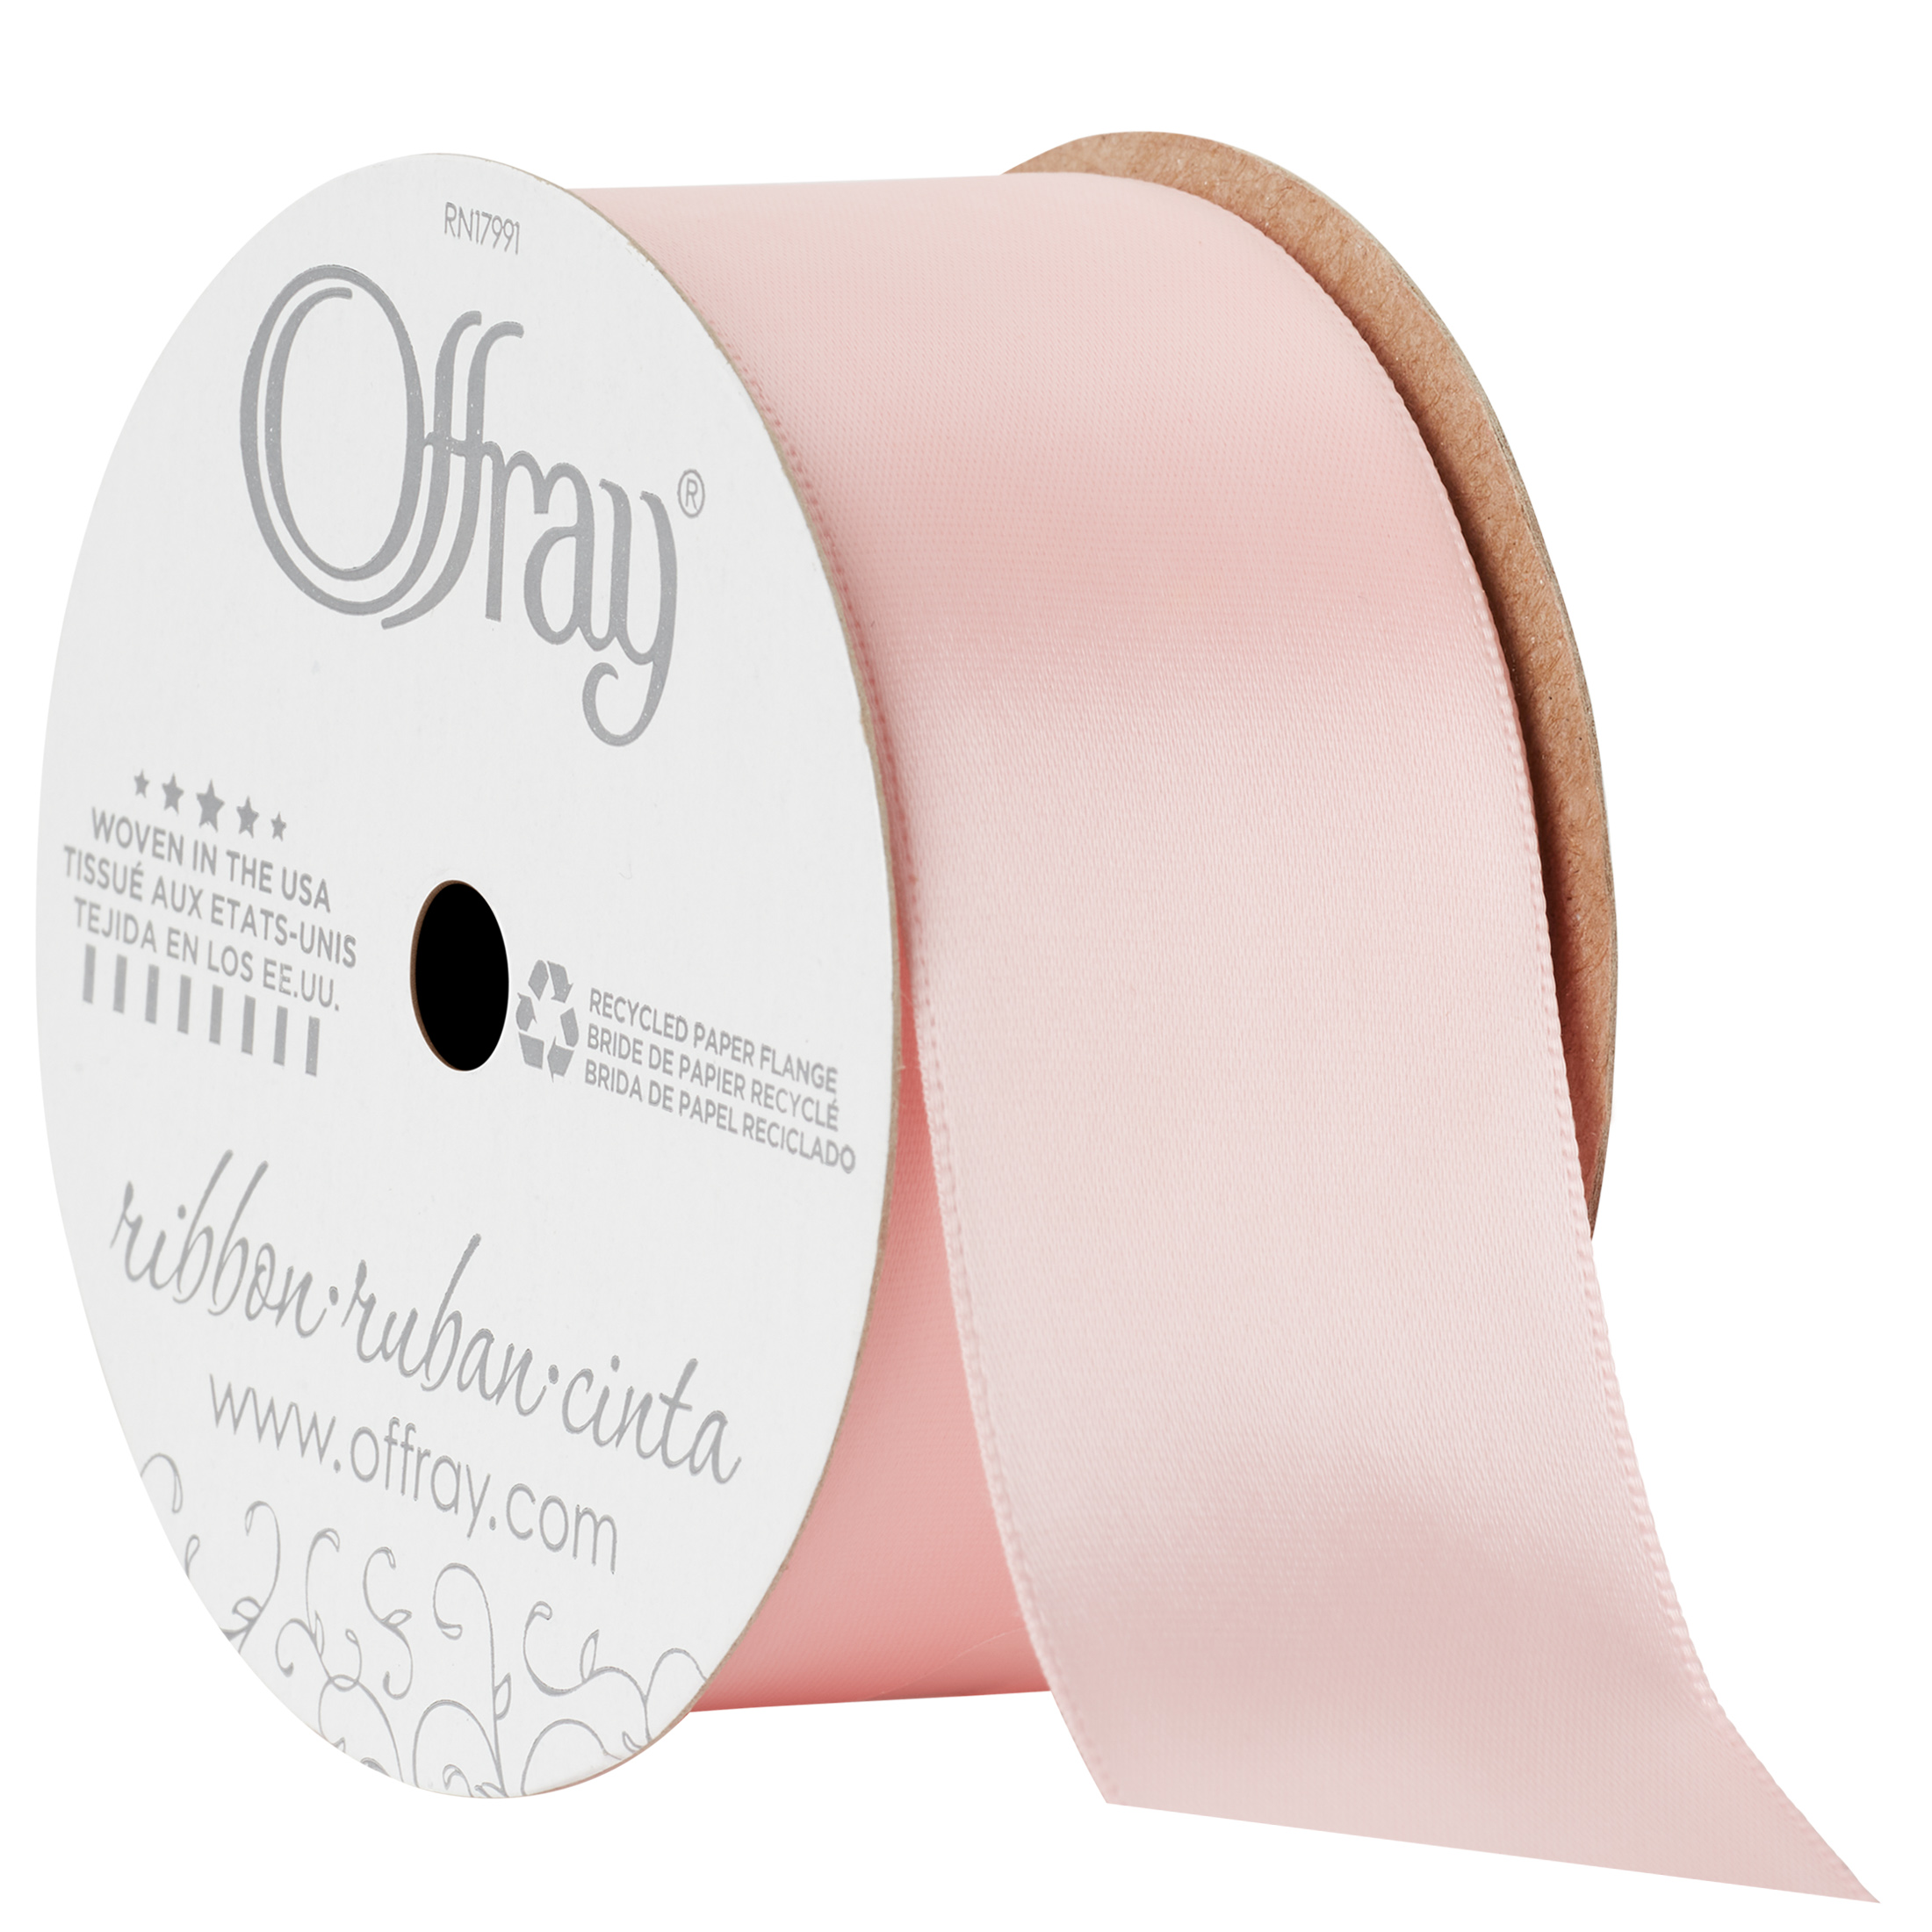 Offray Ribbon, Carnation Pink 1 1/2 inch Single Face Satin Polyester Ribbon, 12 feet - image 1 of 6